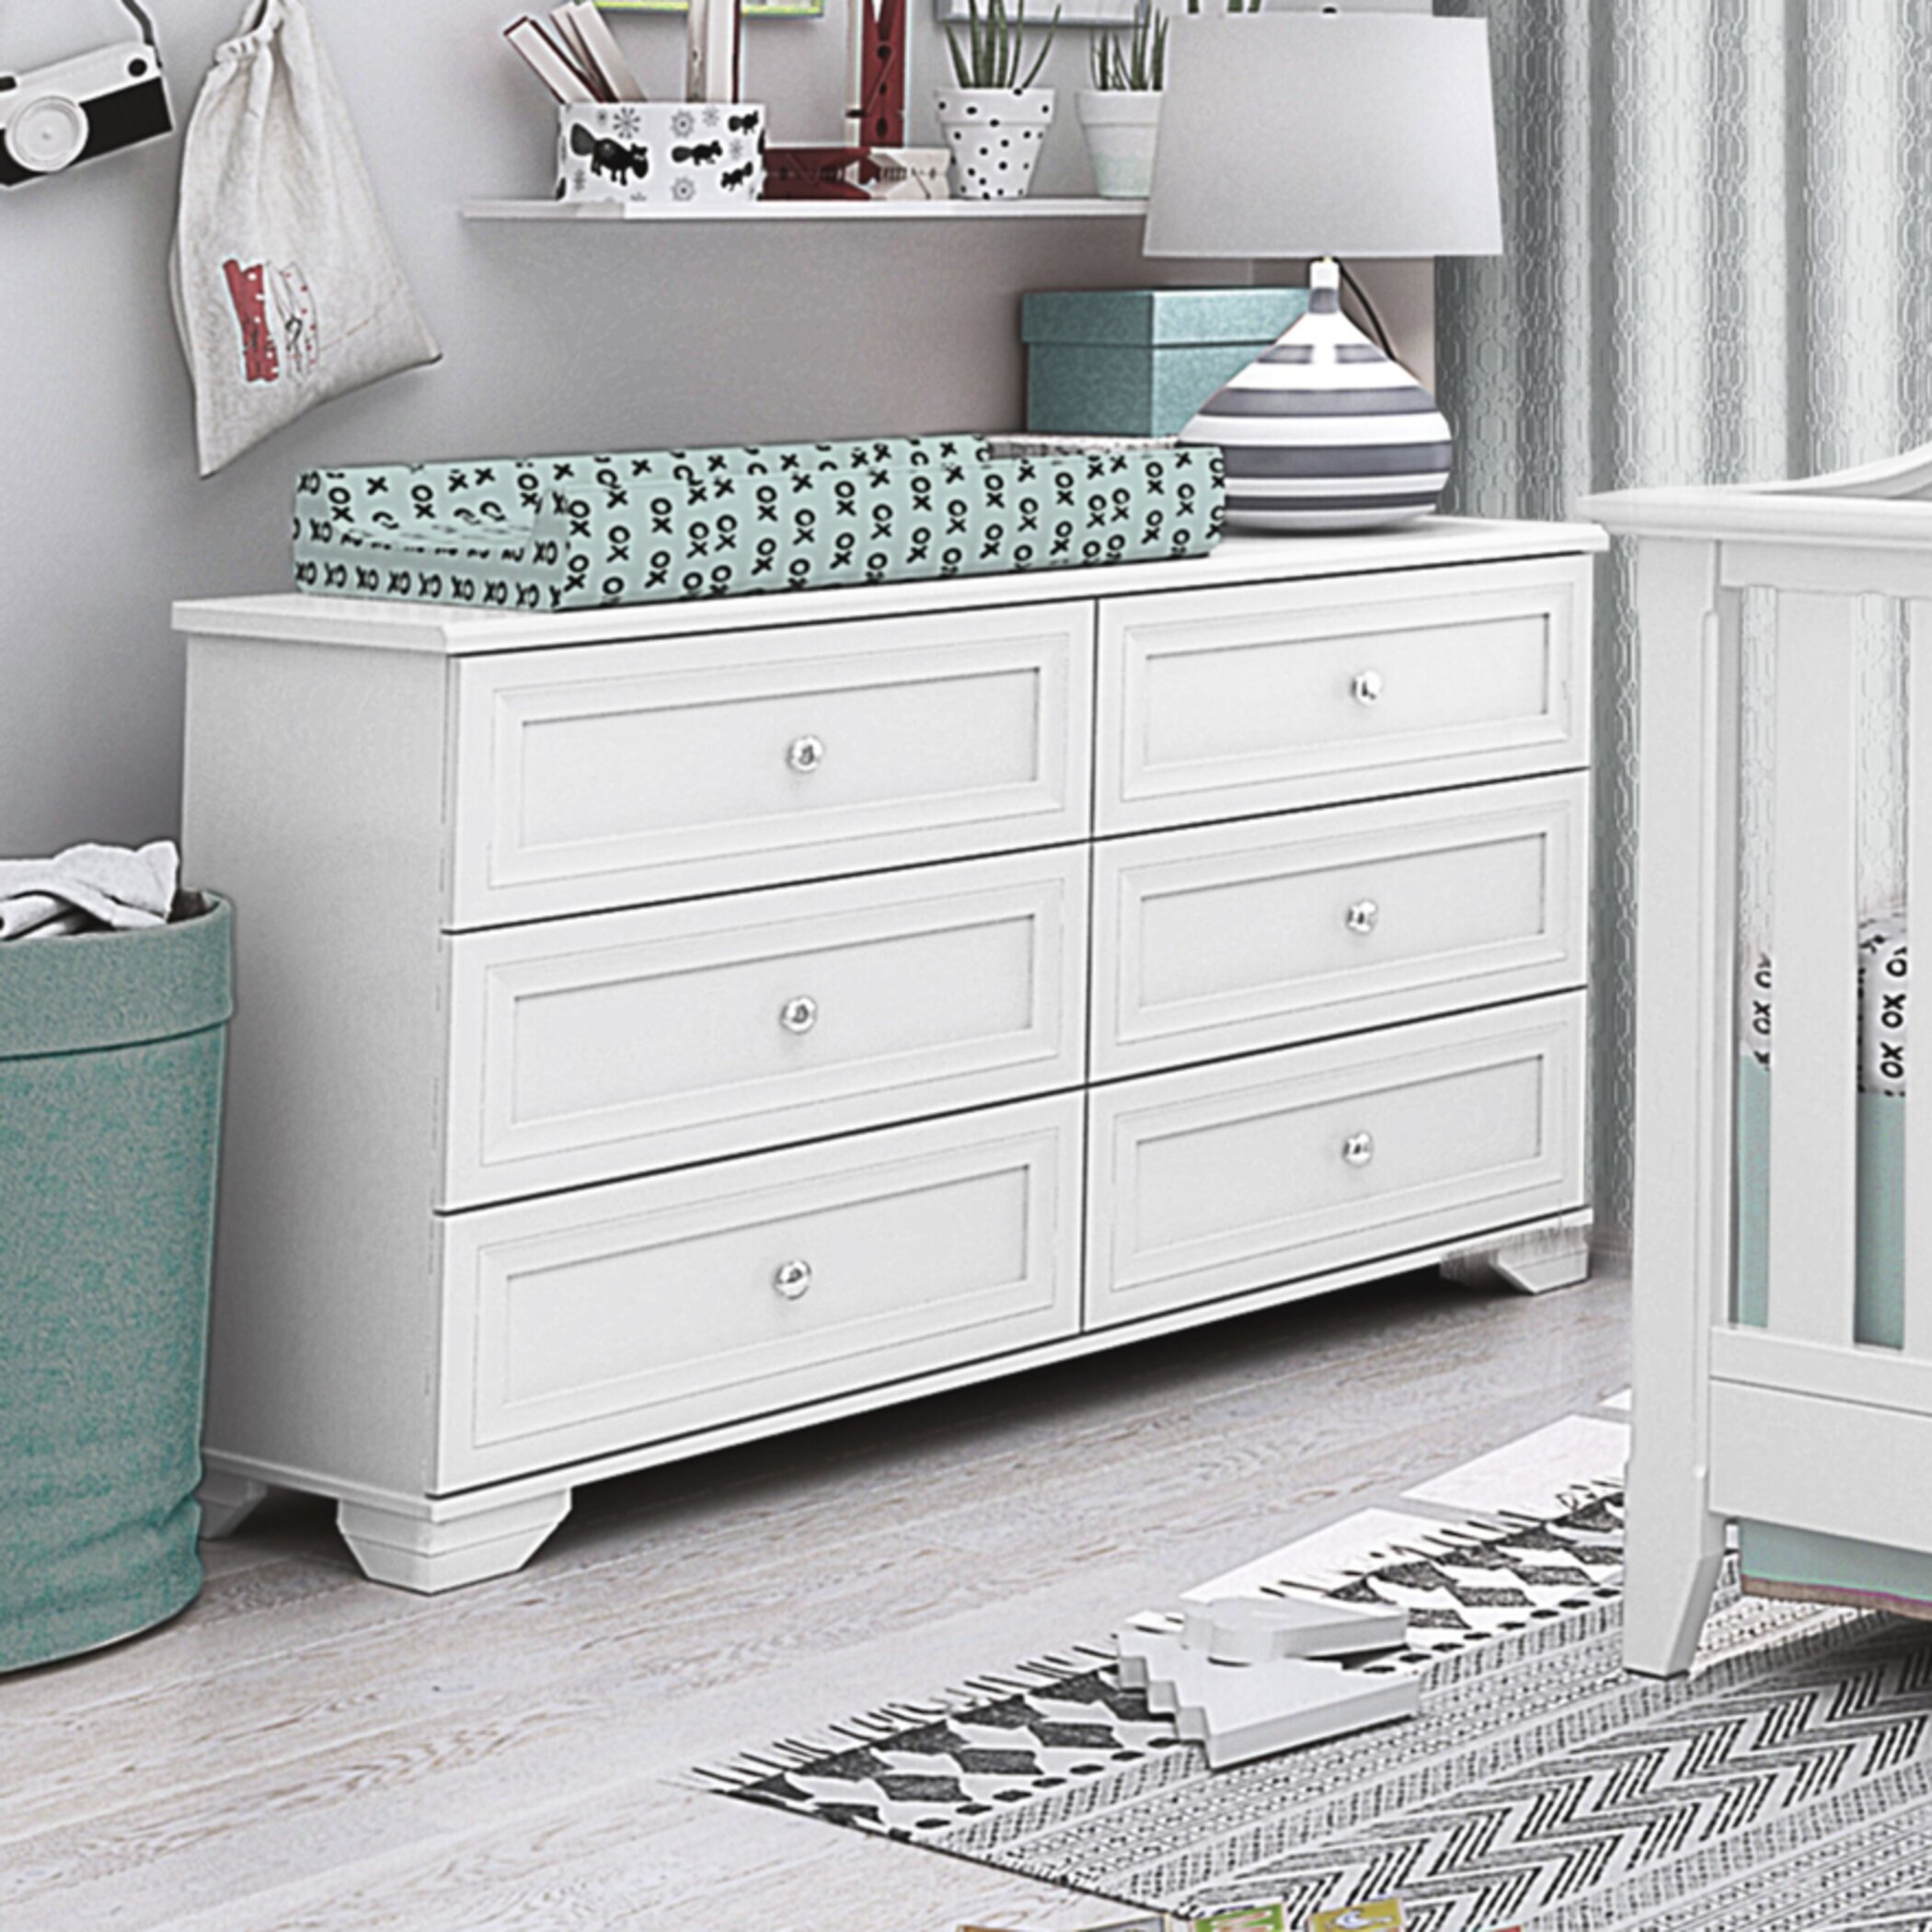 Big Sale Deals On Kids Dressers And Chest You Ll Love In 2019